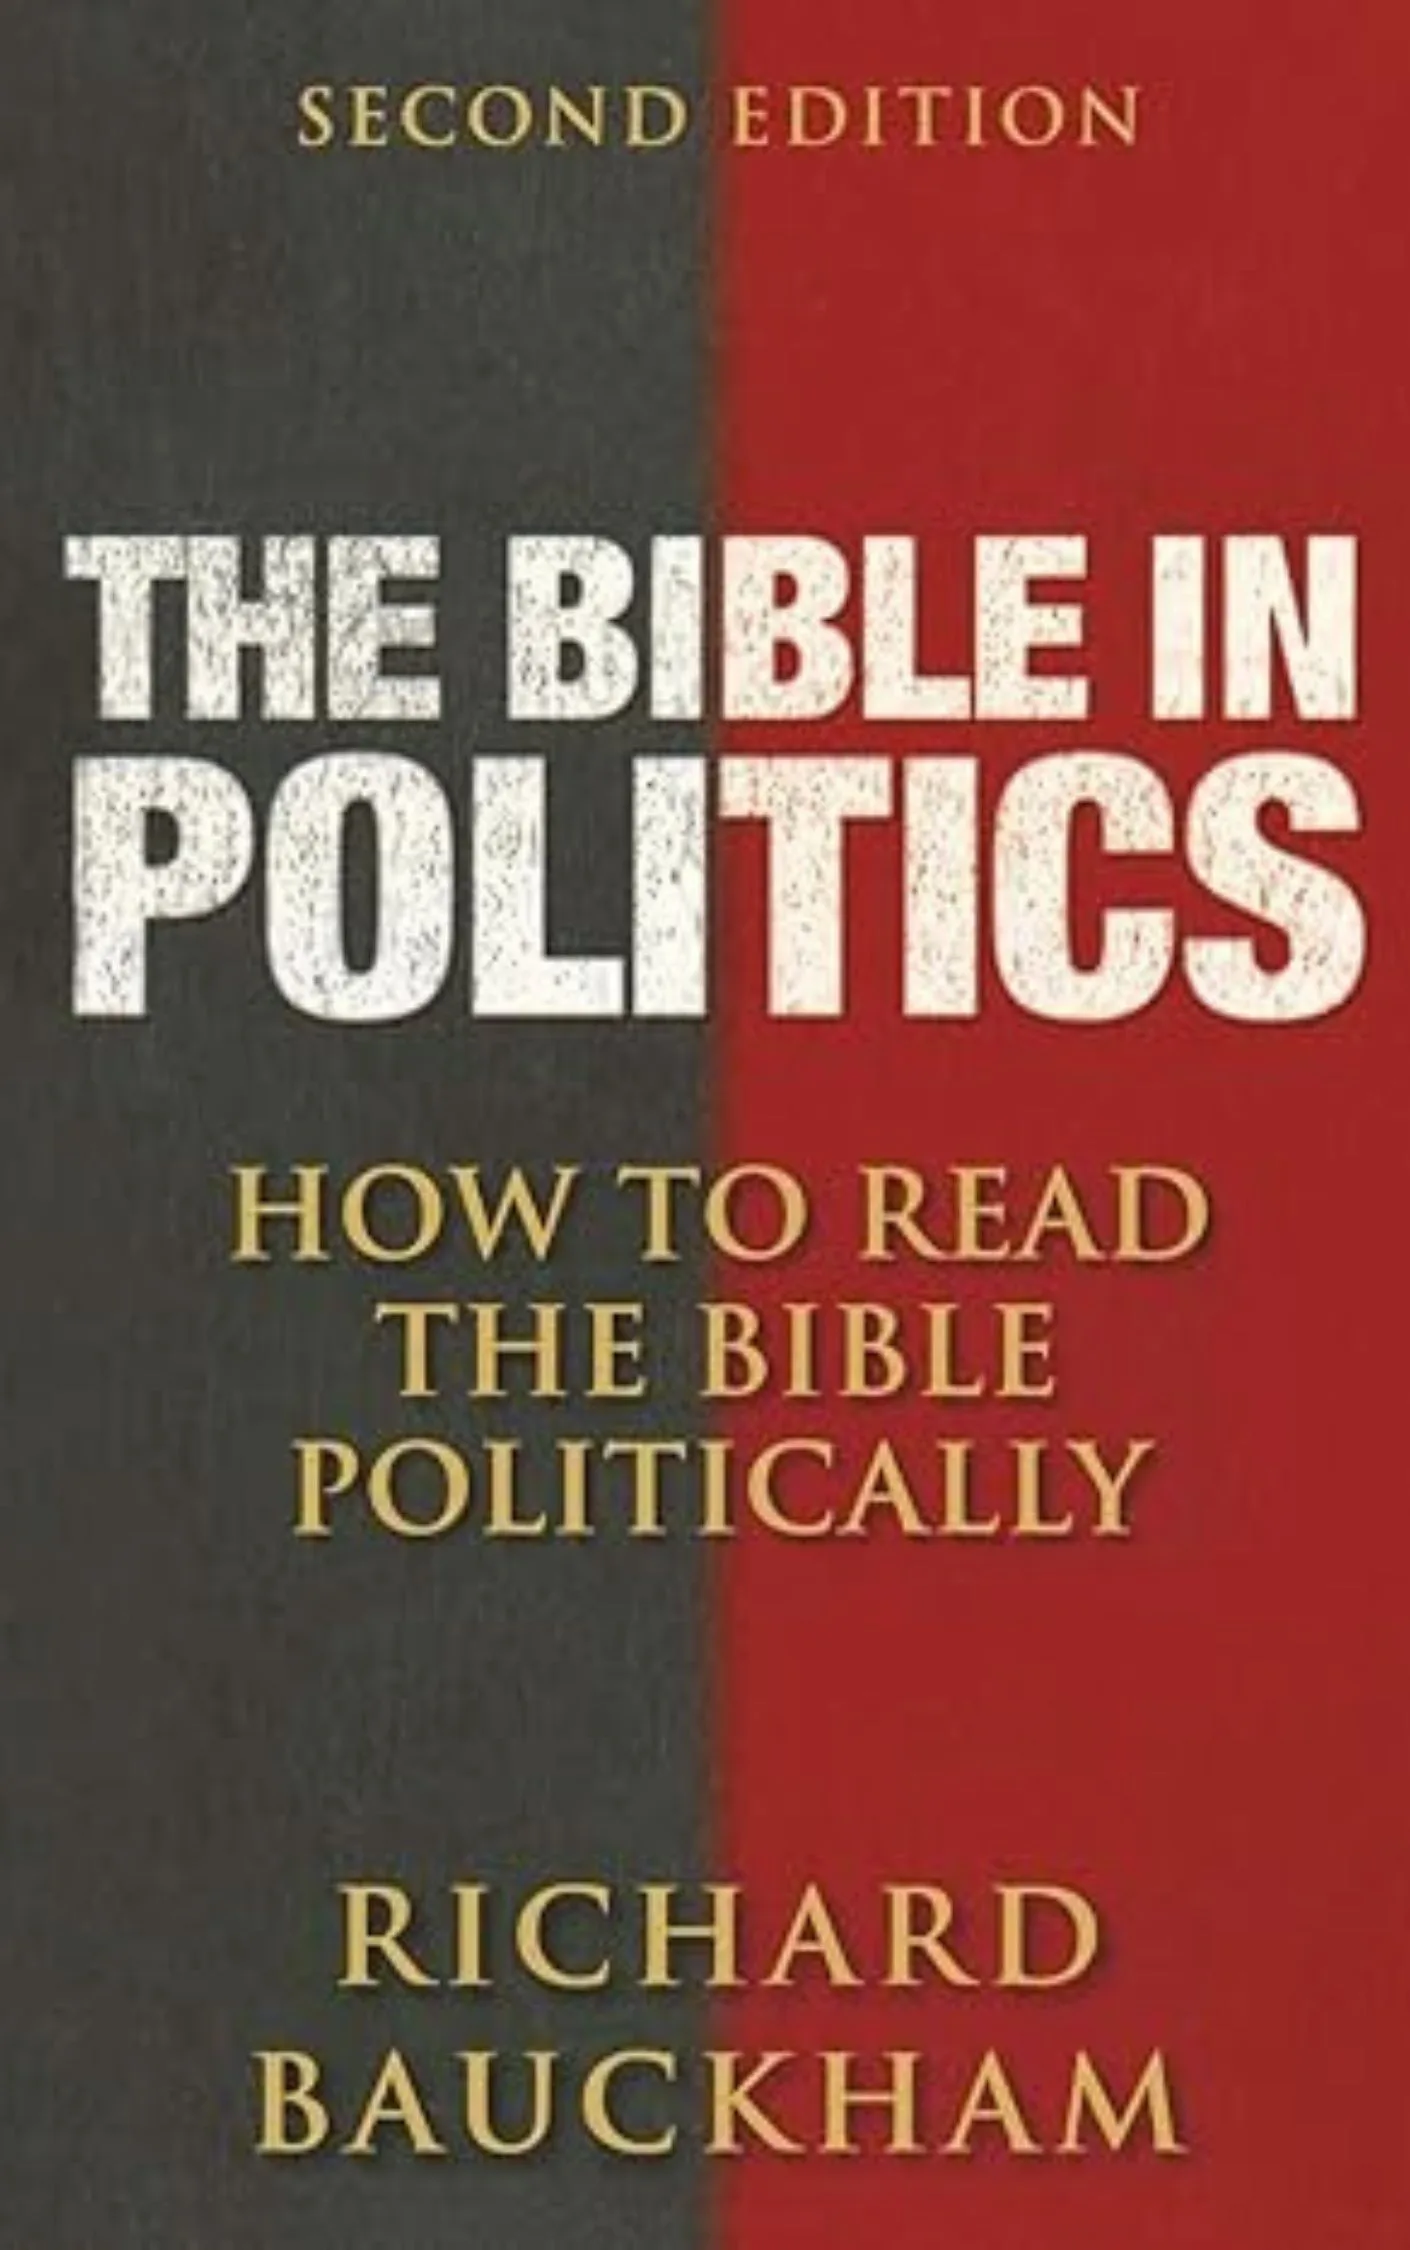 The Bible in Politics: How to Read the Bible Politically by Richard Bauckham